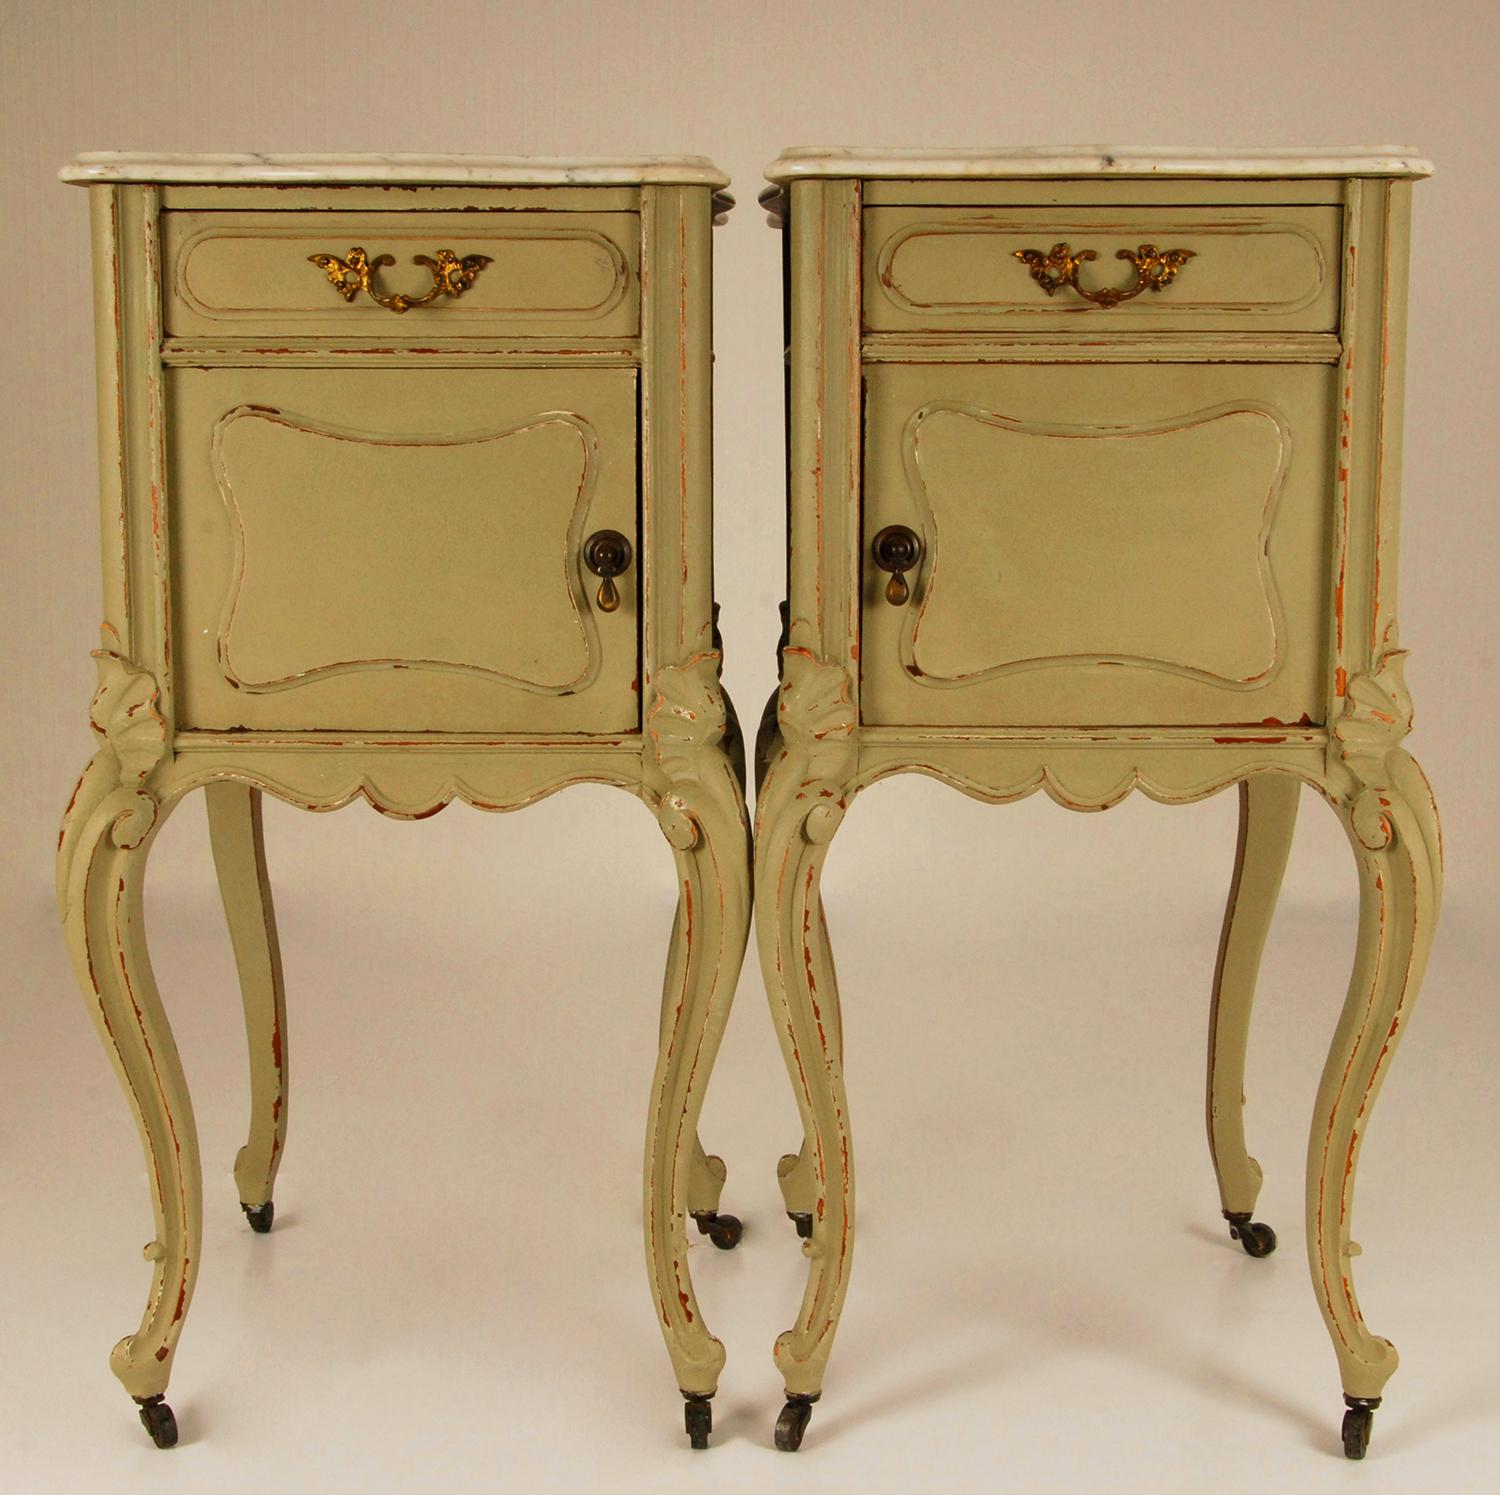 A pair French Victorian marble top nightstands on metal castors. 
Distressed painted in green with a gray vained white carrara marble top. 
Made of carved wood.
To be dated: late 19th century Napoleon III period.
Origin: France
Condition good: